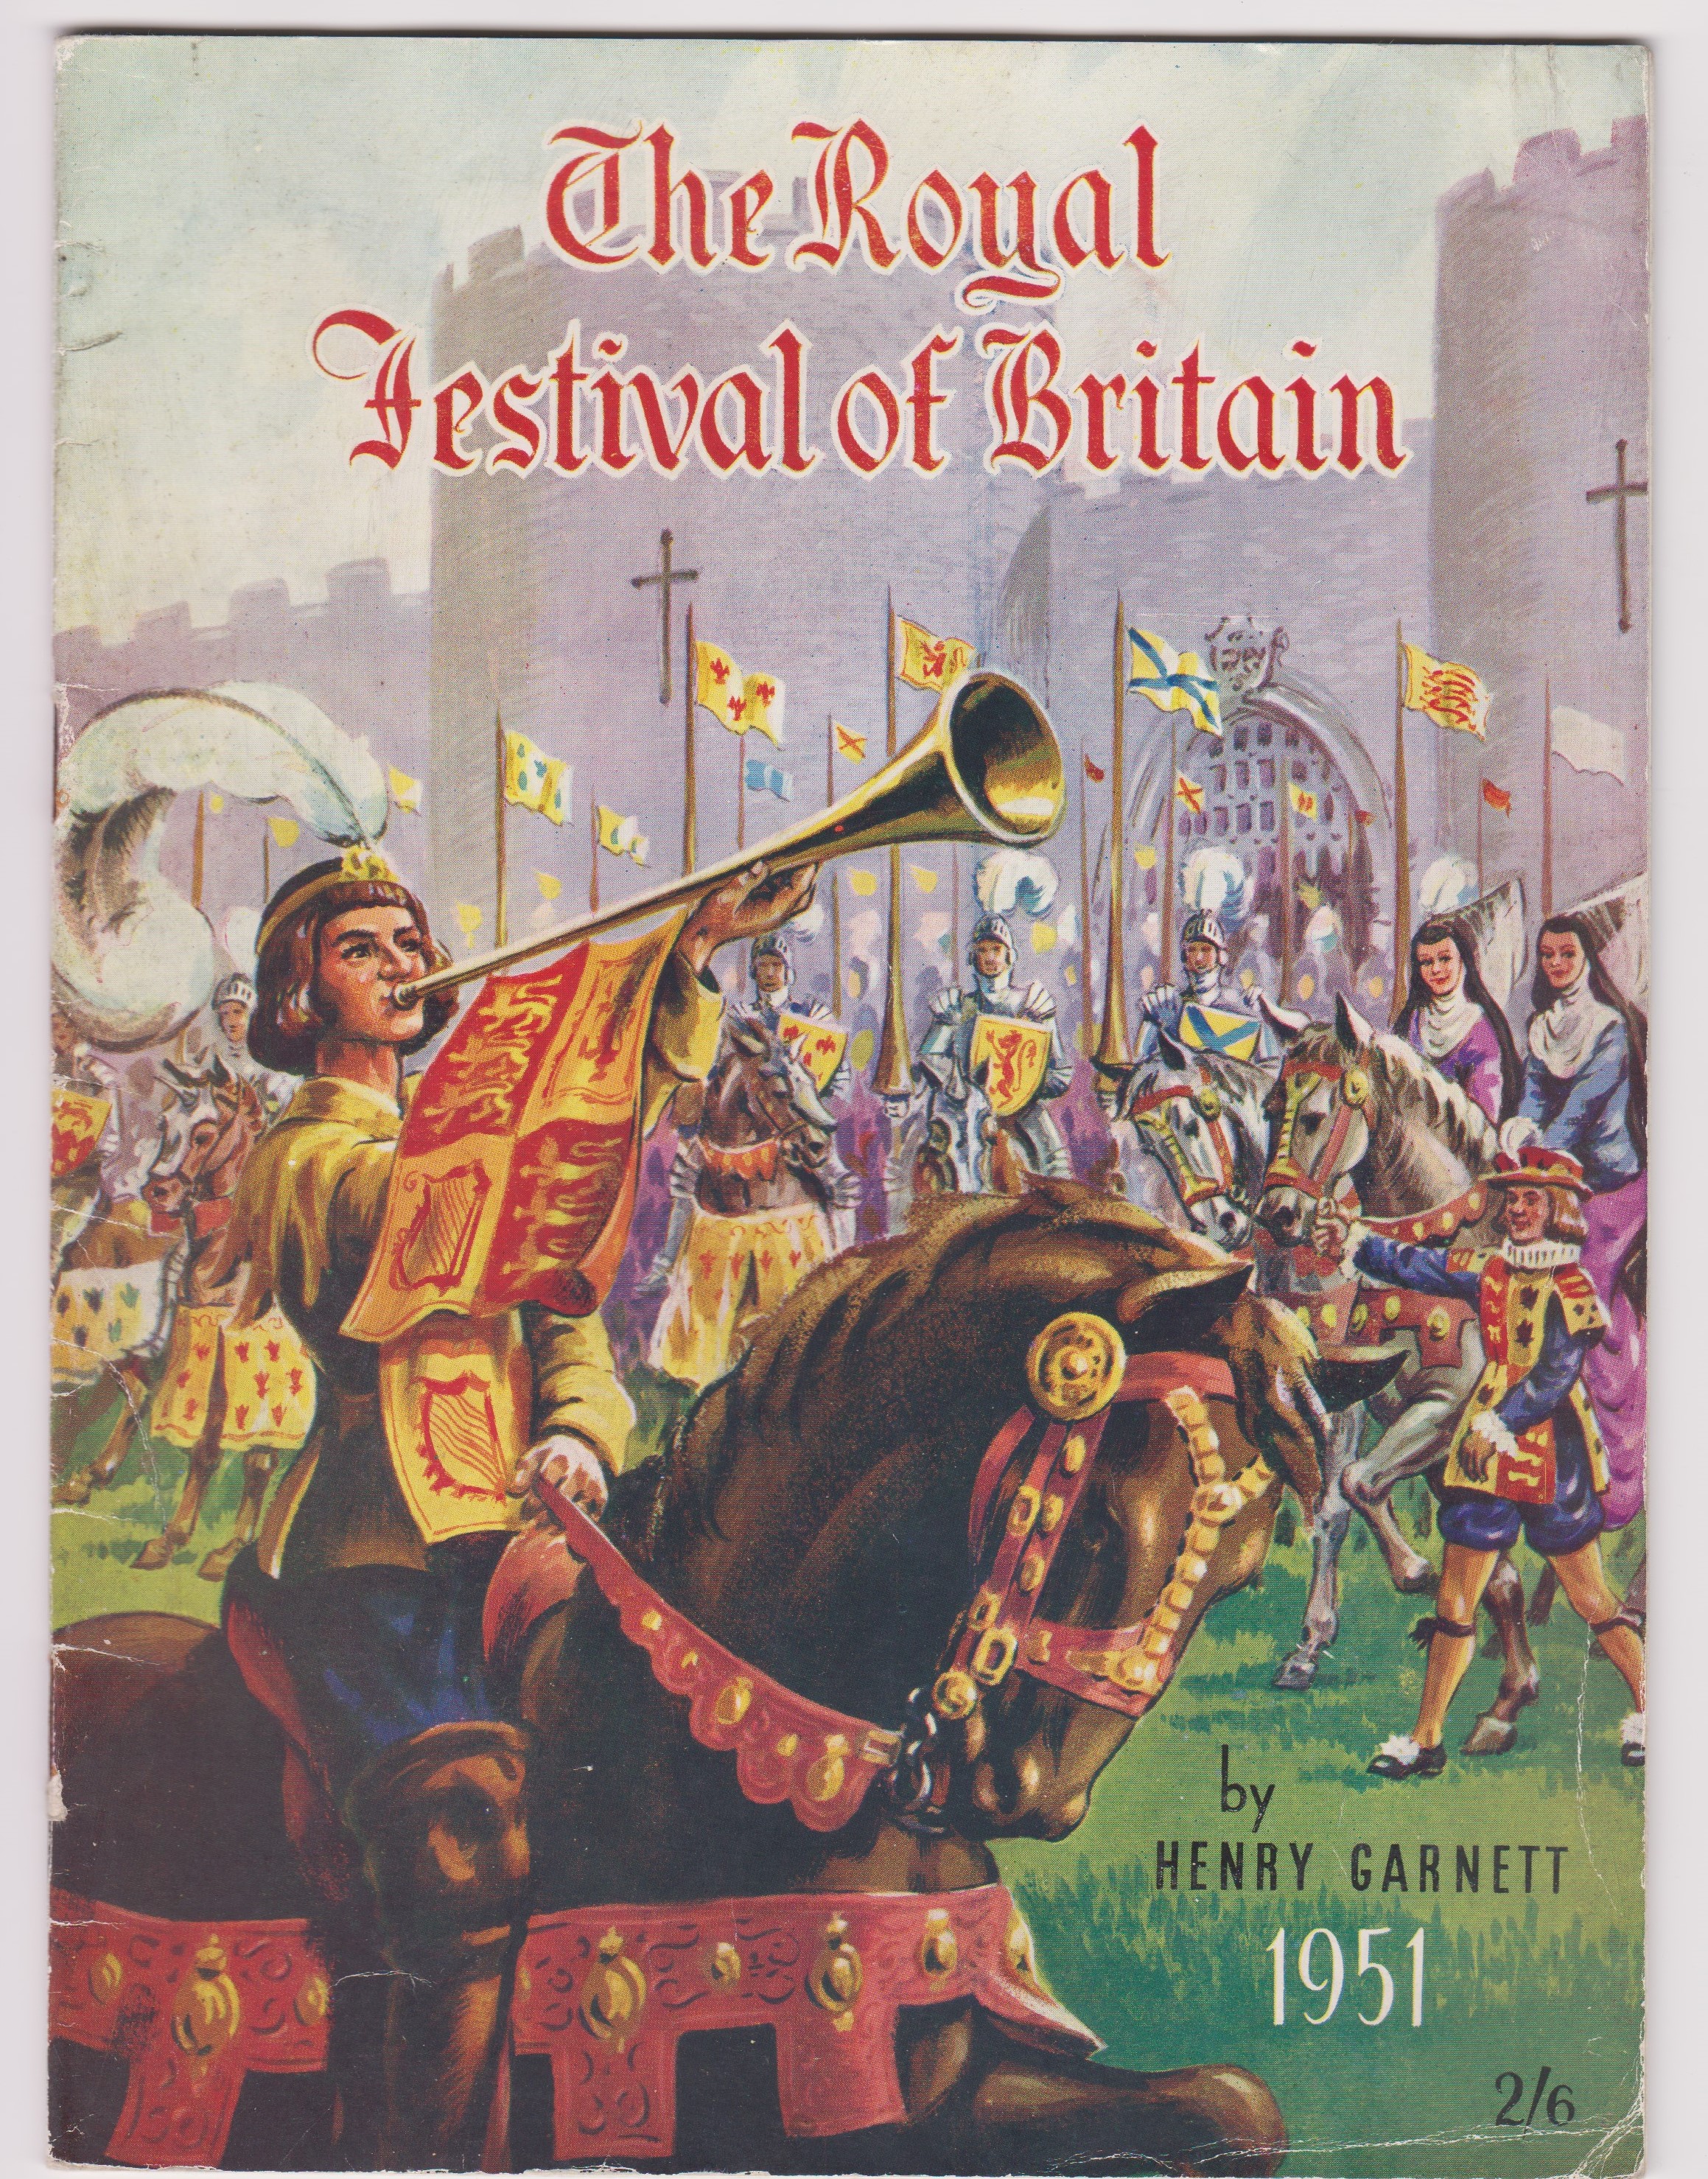 1951 The Royal Festival of Britain by Henry Garnet, published by The Worcester Press in good